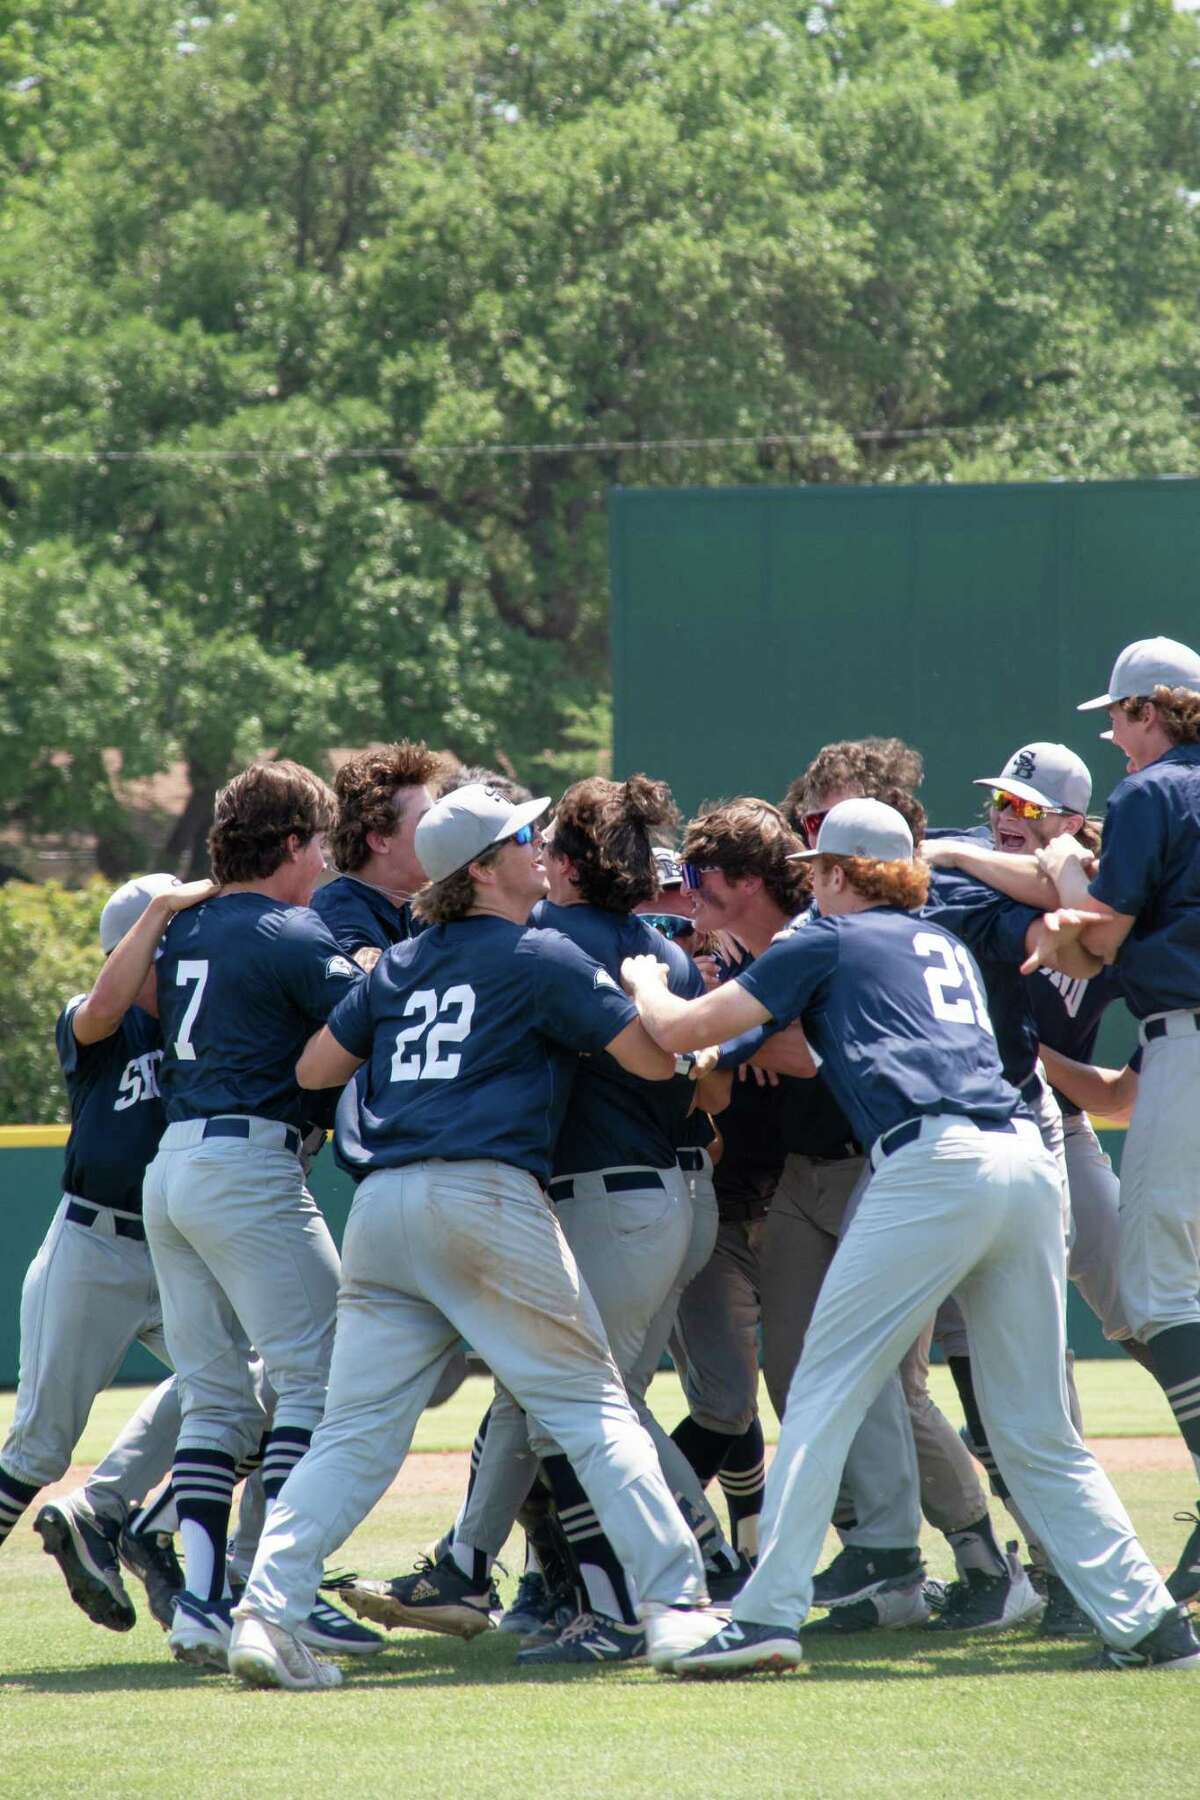 The Second Baptist School baseball players mob each other around the pitcher's mound after getting the final out in an 11-5 victory over Brook Hill in the TAPPS Division II state championship game on the afternoon of May 19 at Clay Cloud Ballpark on the campus of the University of Texas at Arlington.